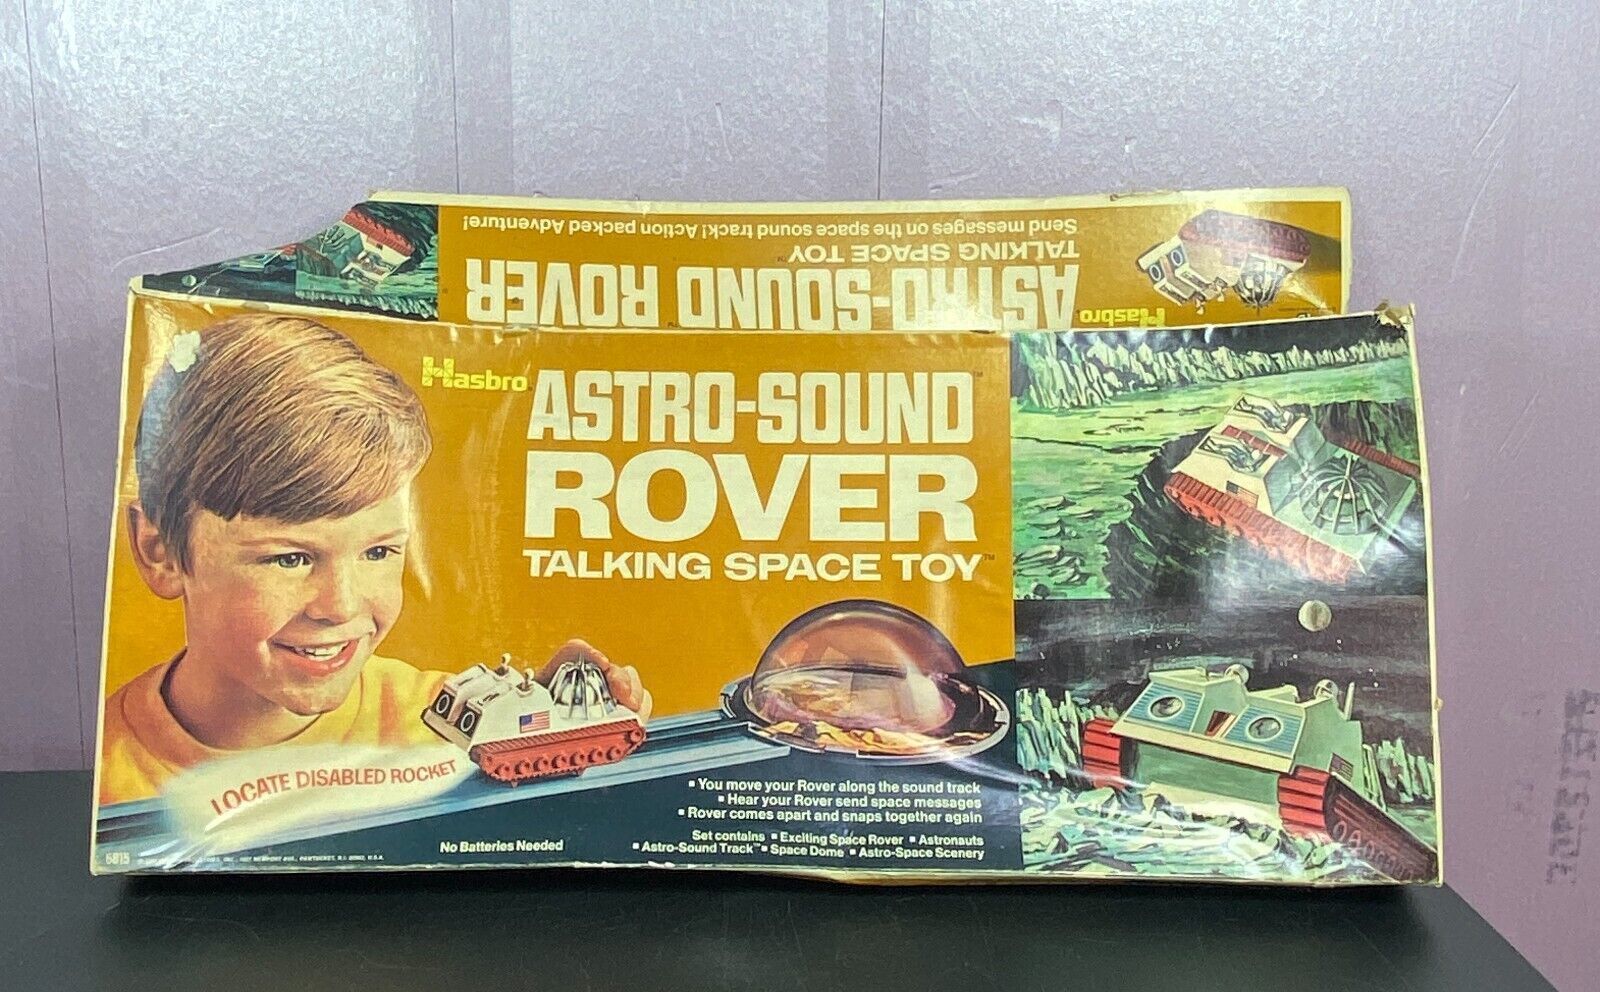 1969 Hasbro ASTRO-SOUND ROVER Talking Space Toy Complete in Box #5815 Read - $247.50